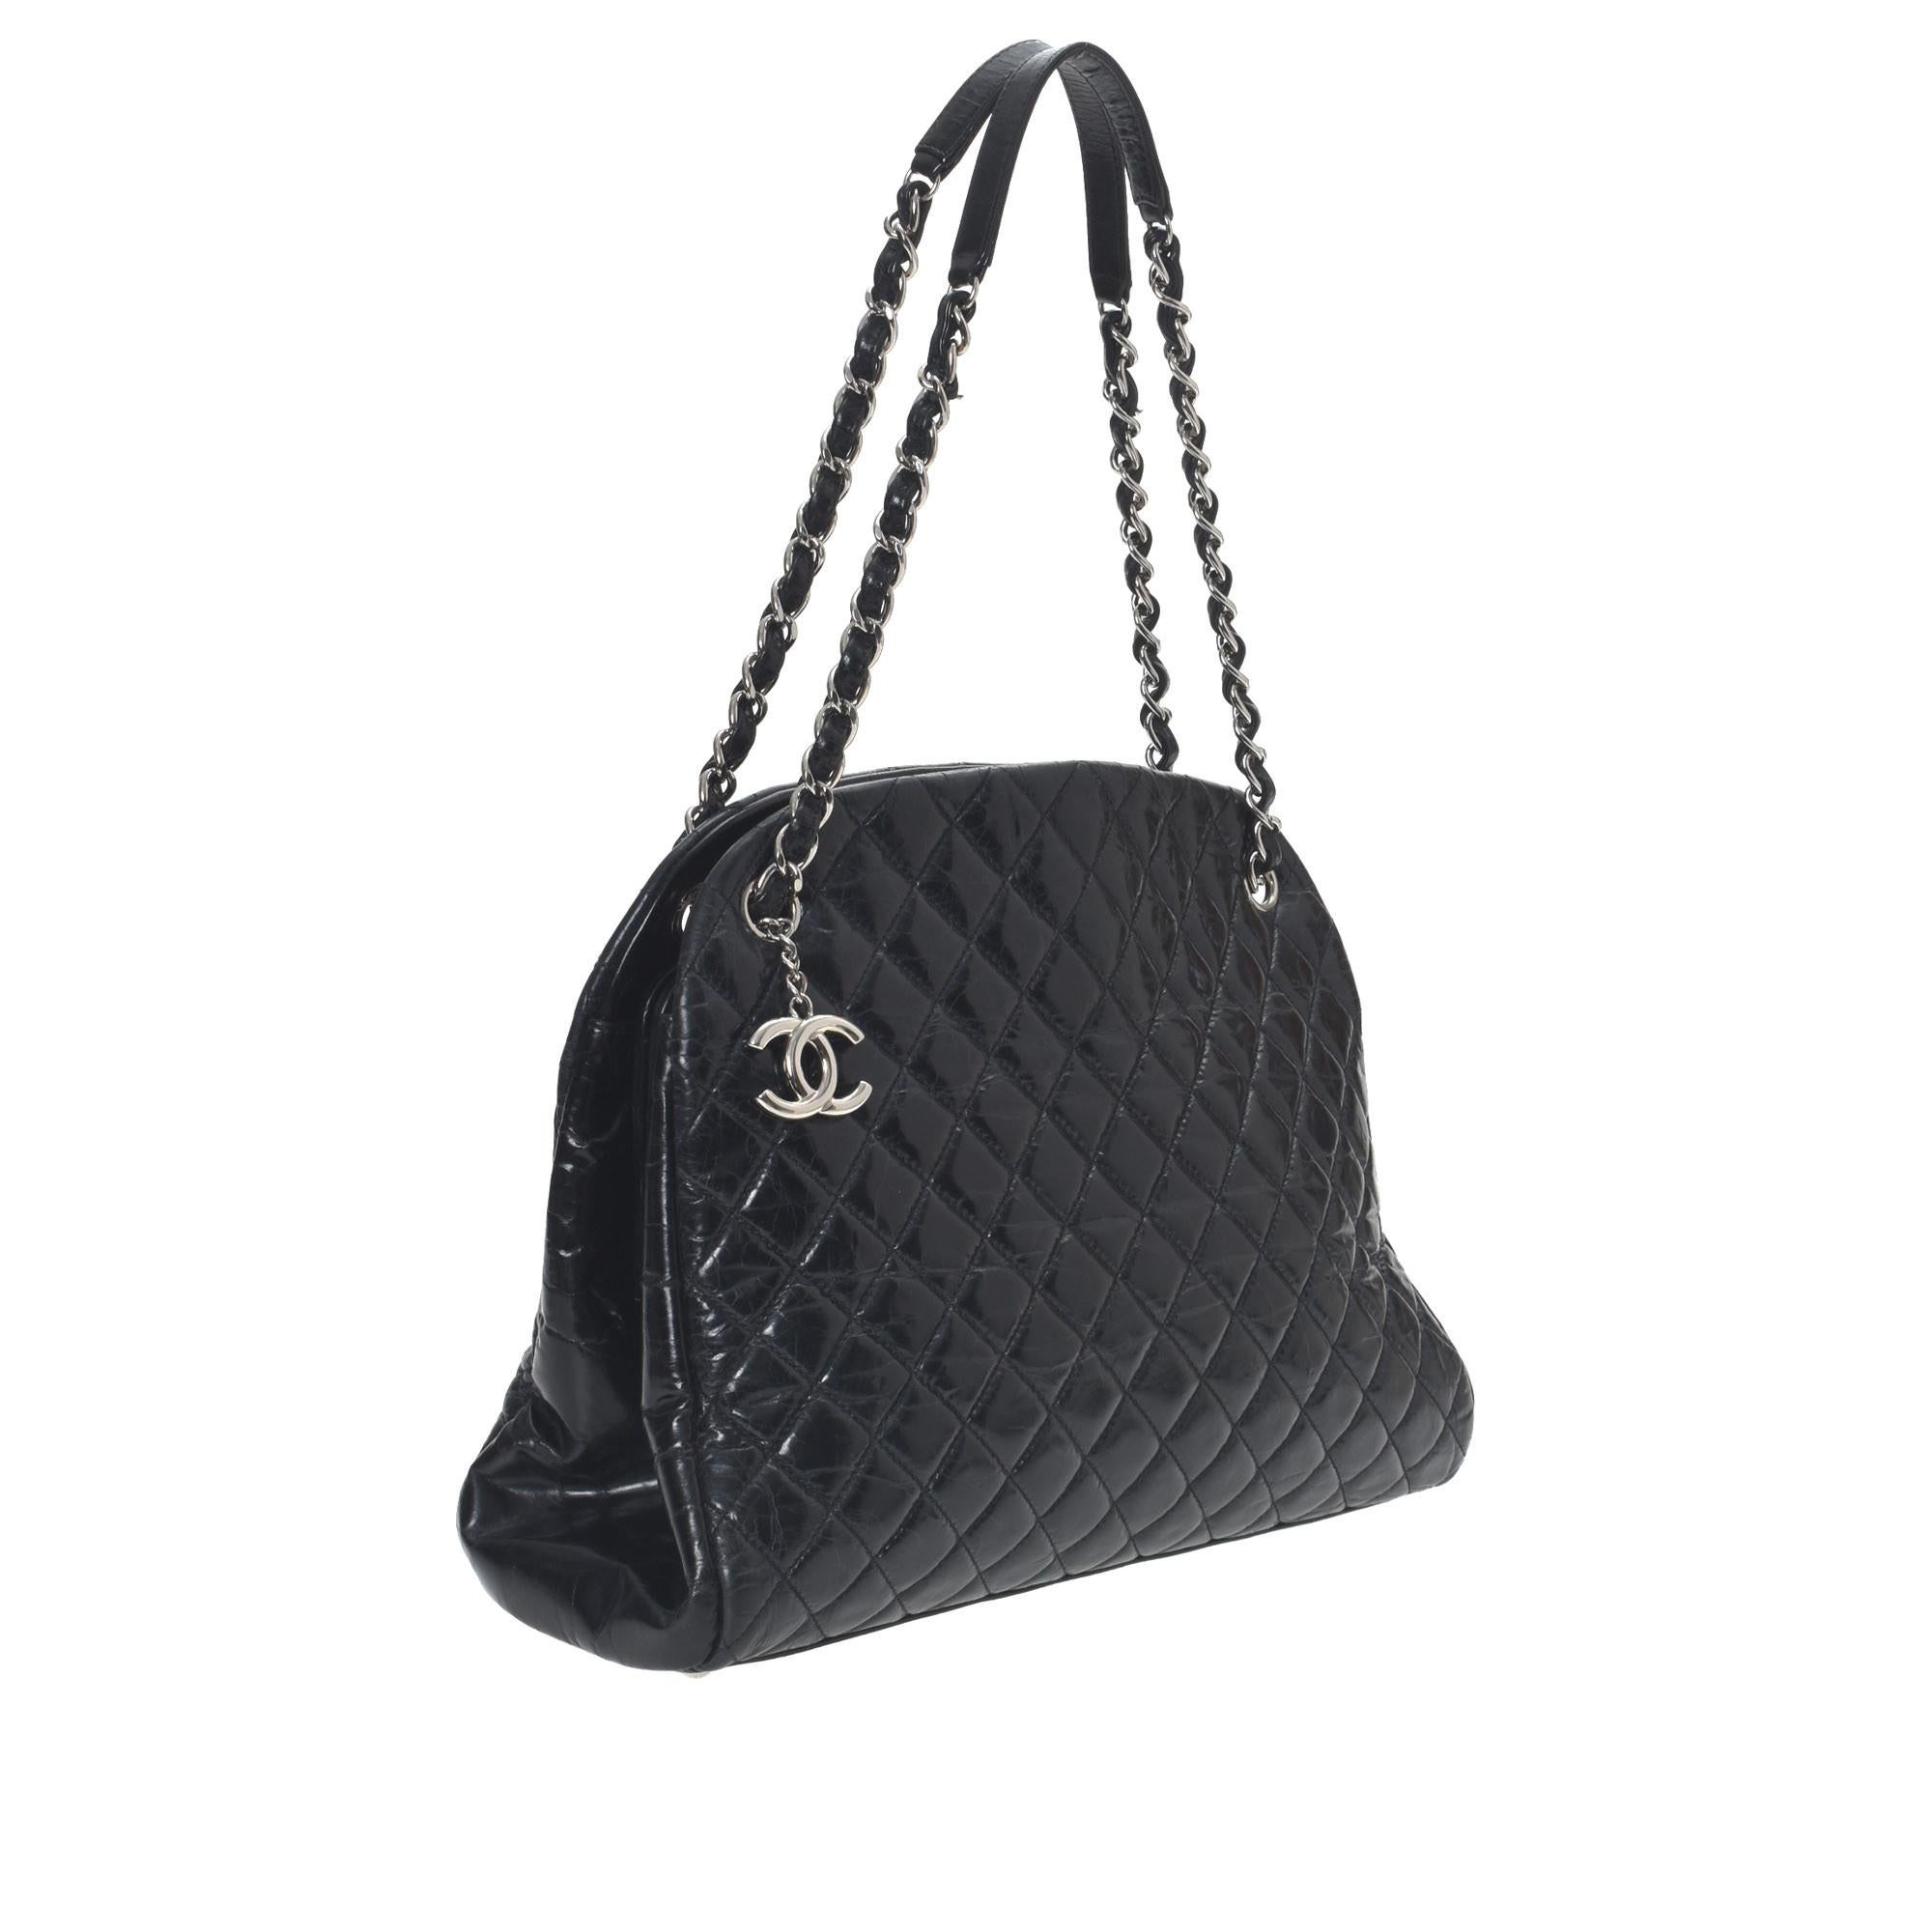 Gorgeous vintage Chanel CC Logo Chain shoulder bag  in luxurious black leather.
Authenticated by LXRandCo.
